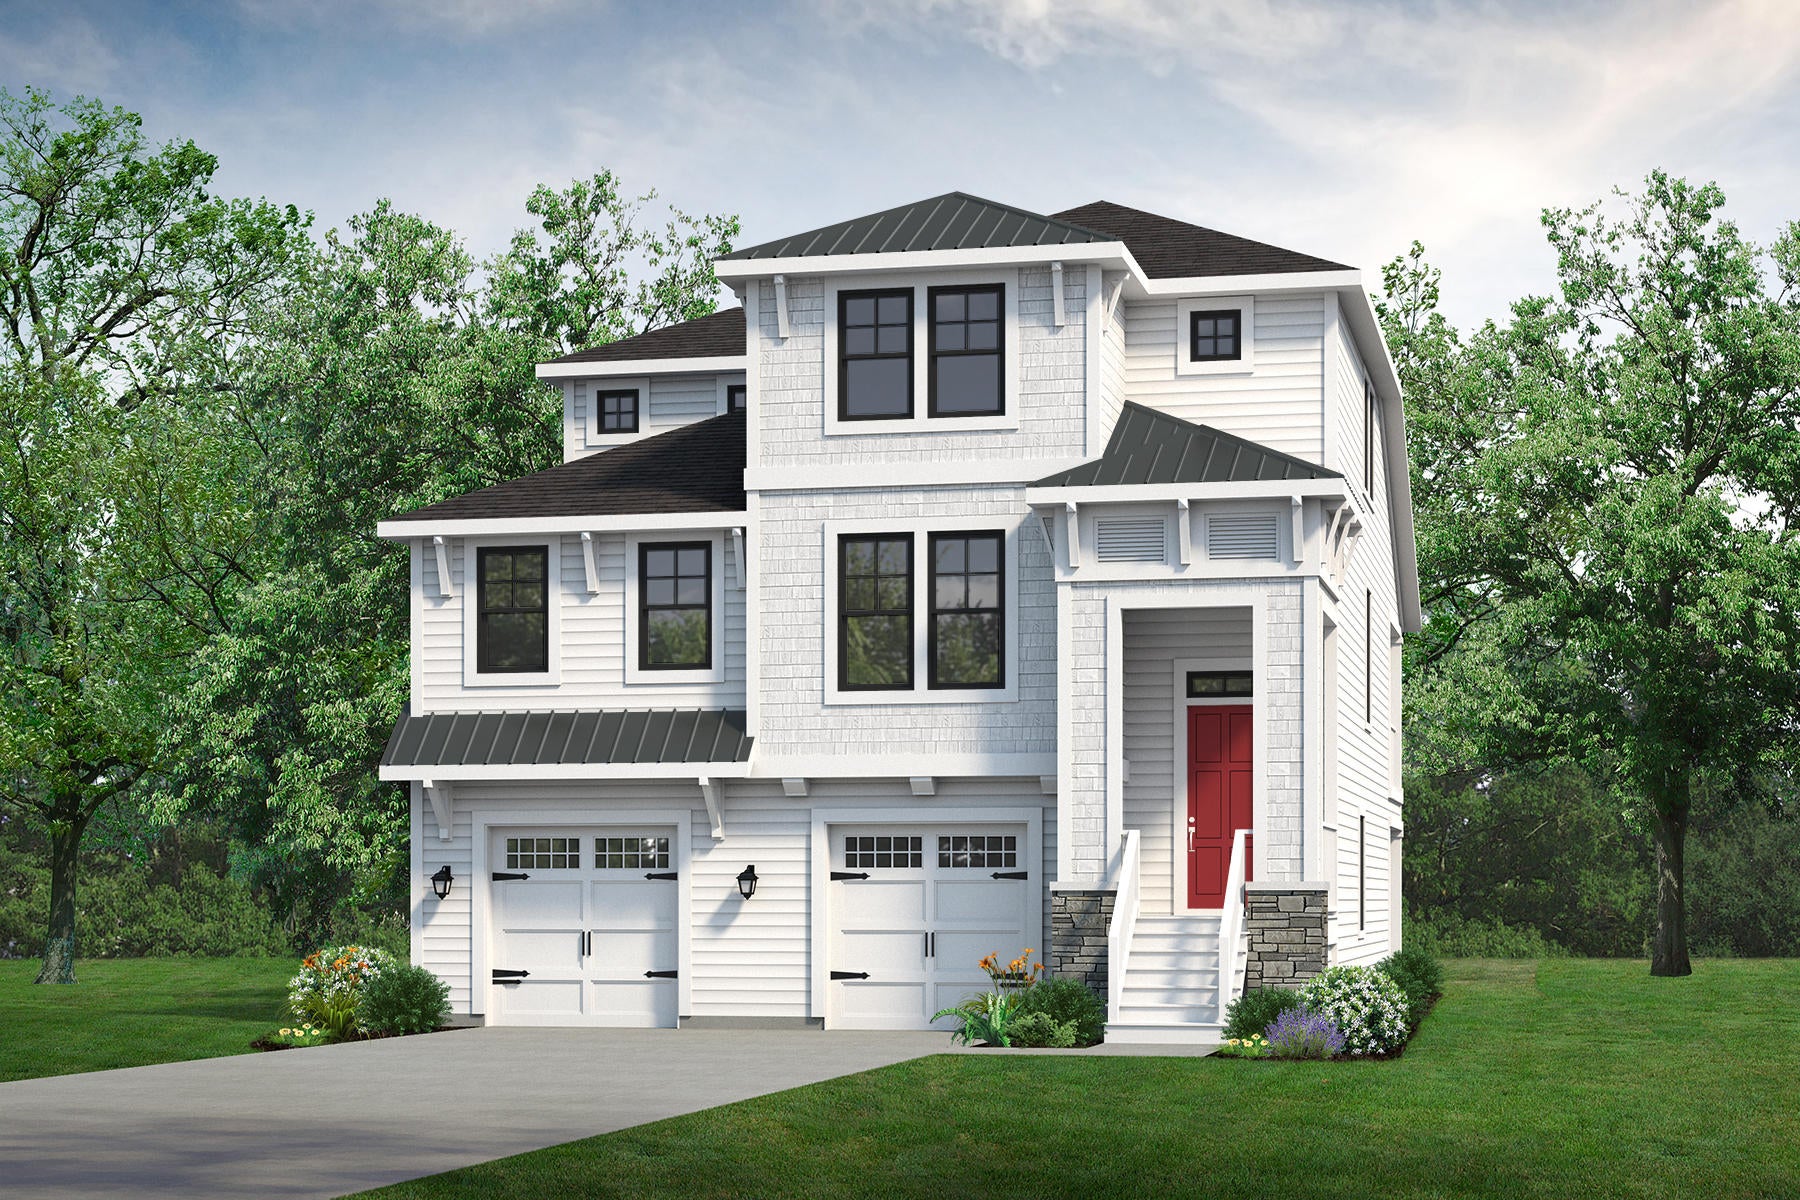 Chesapeake Homes The Charleston - Waterbridge’ s latest model and only three-story home!